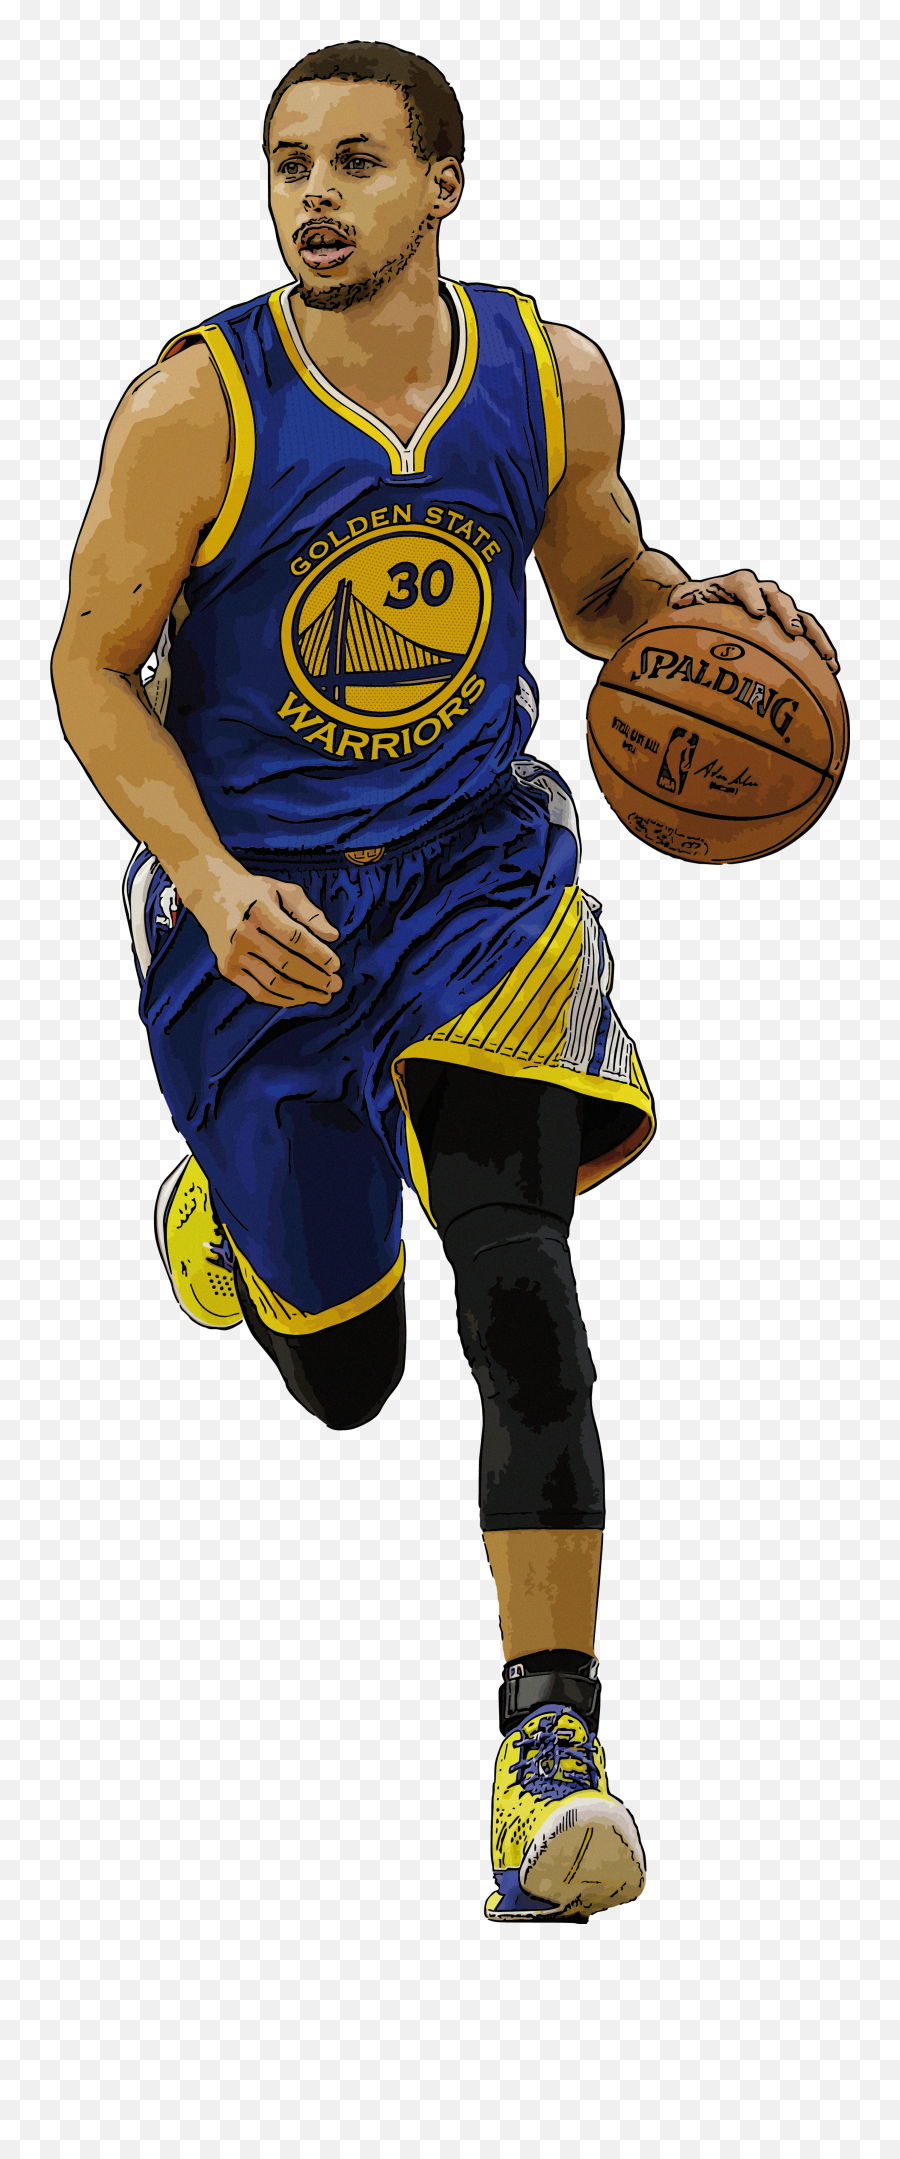 Stephen Curry Png Images In